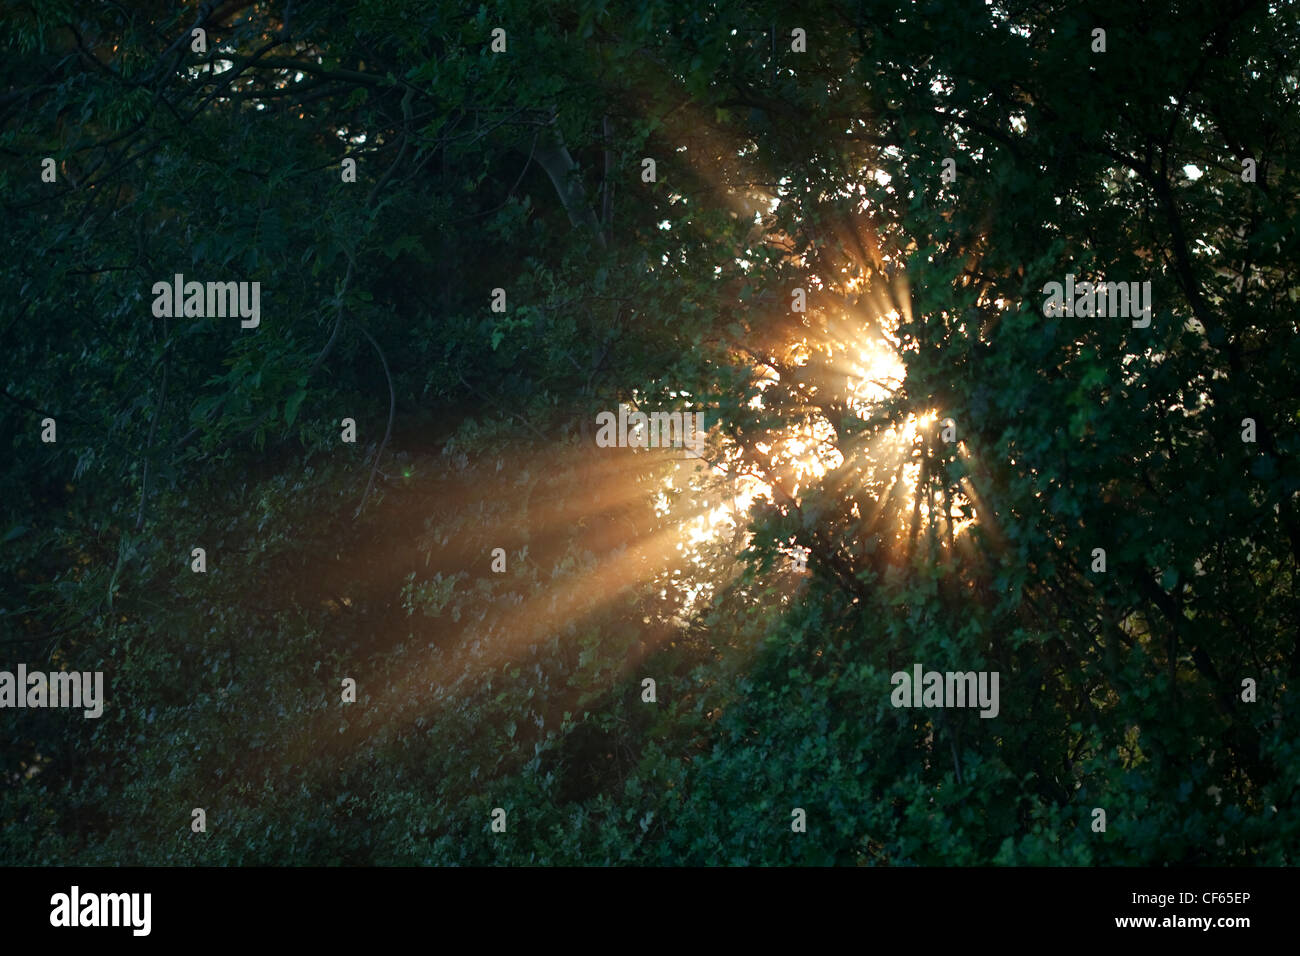 Sunlight bursting through the leaves of a tree. Stock Photo